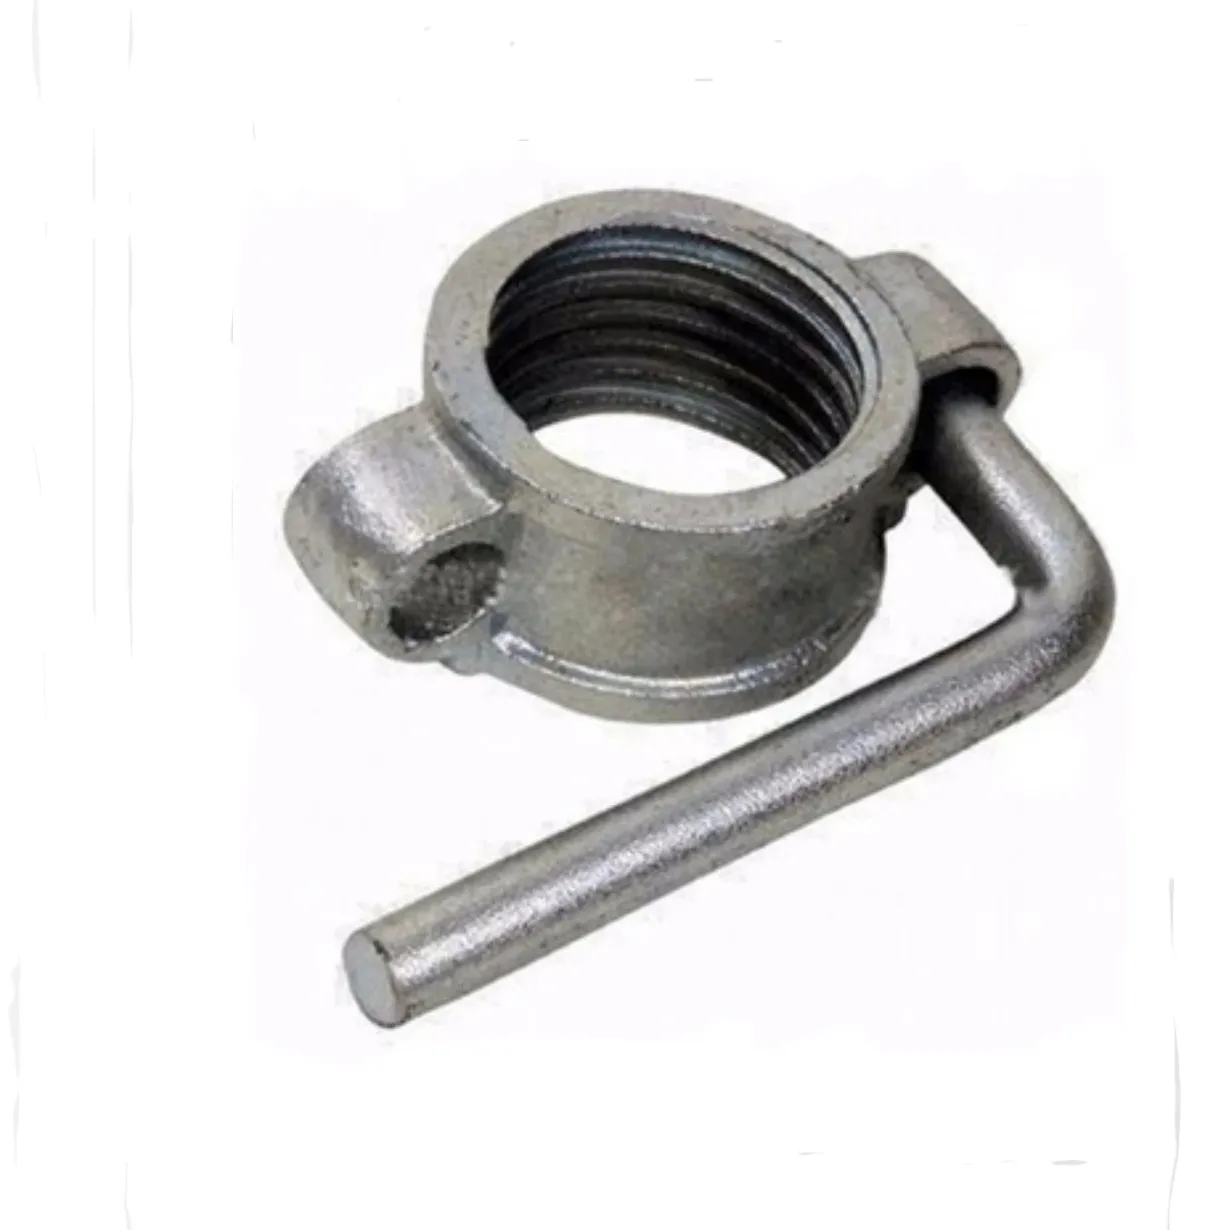 Galvanized Casting Prop Nut of Scaffolding Accessories of KEVA China